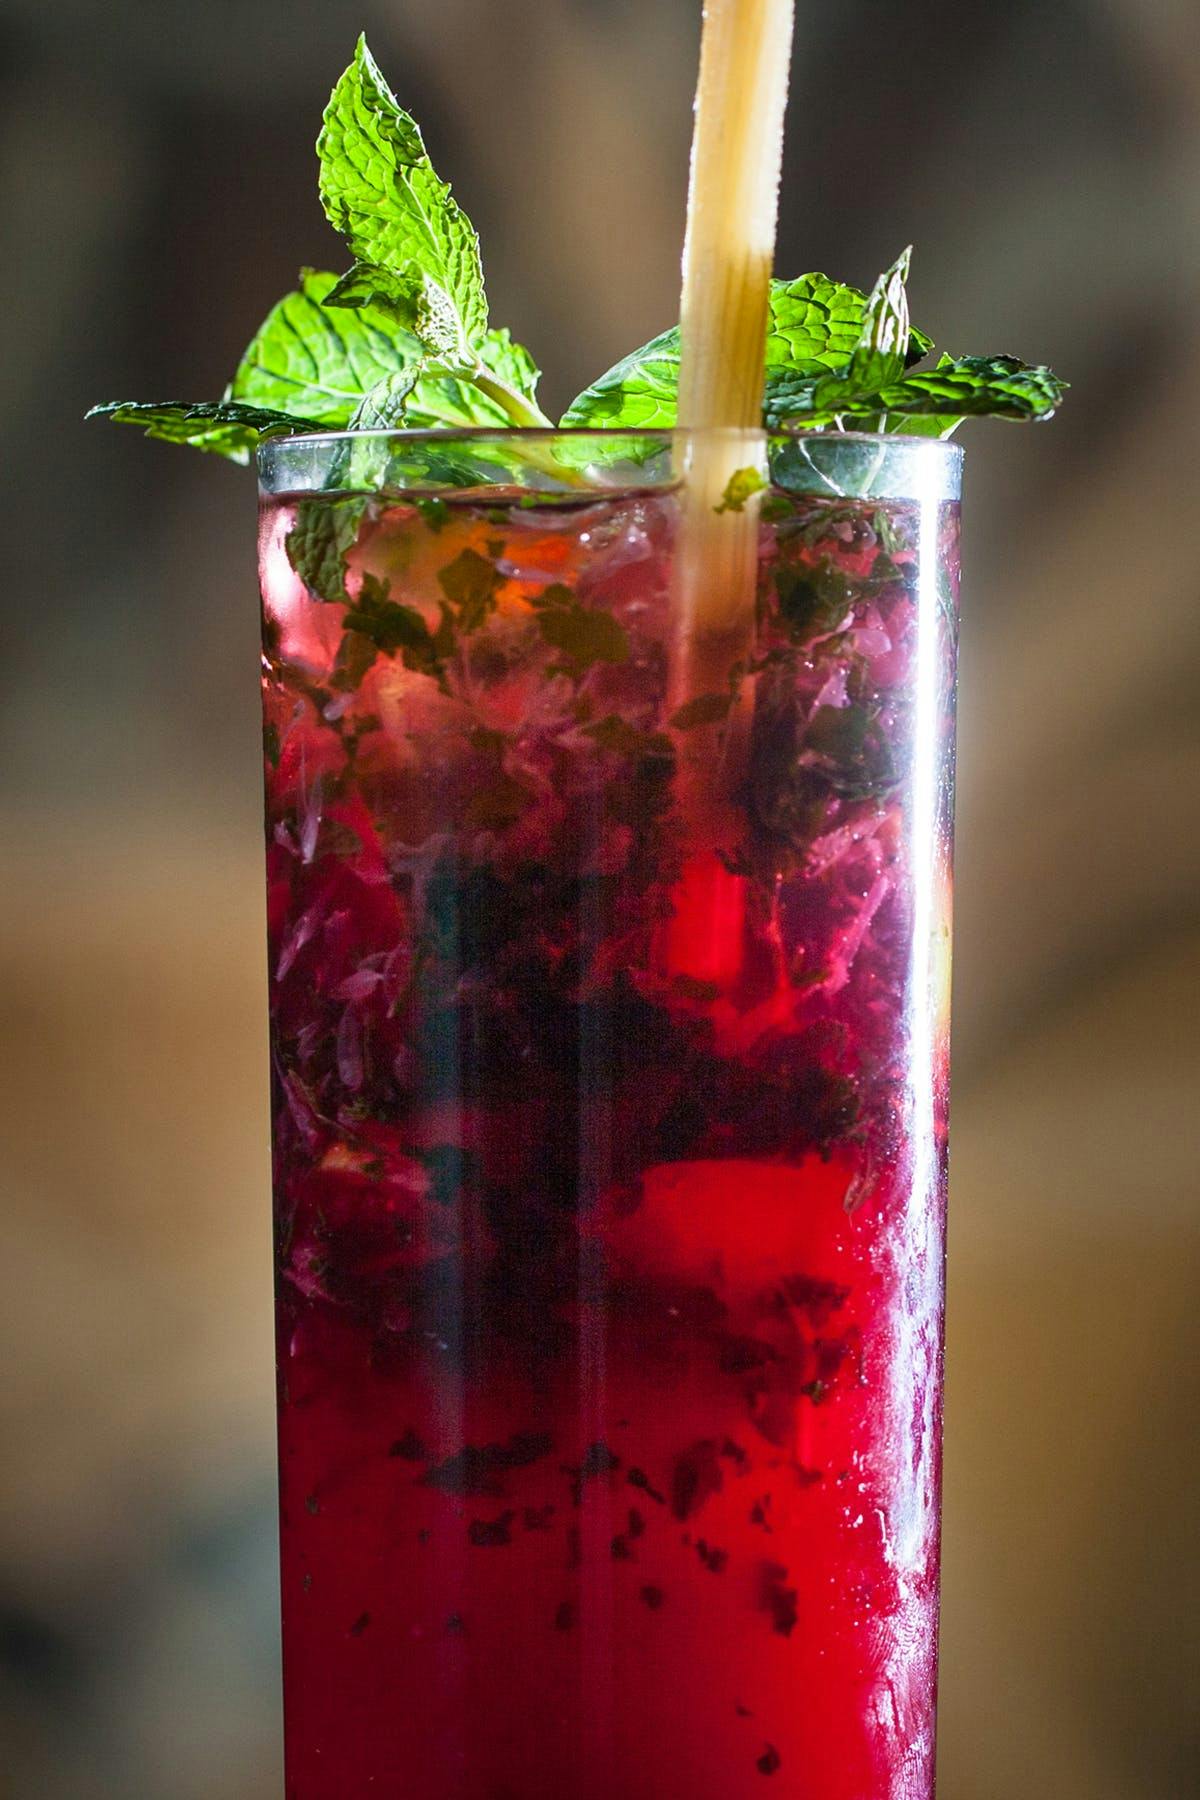 the beet mojito cocktail at SUGARCANE raw bar grill garnished with mint